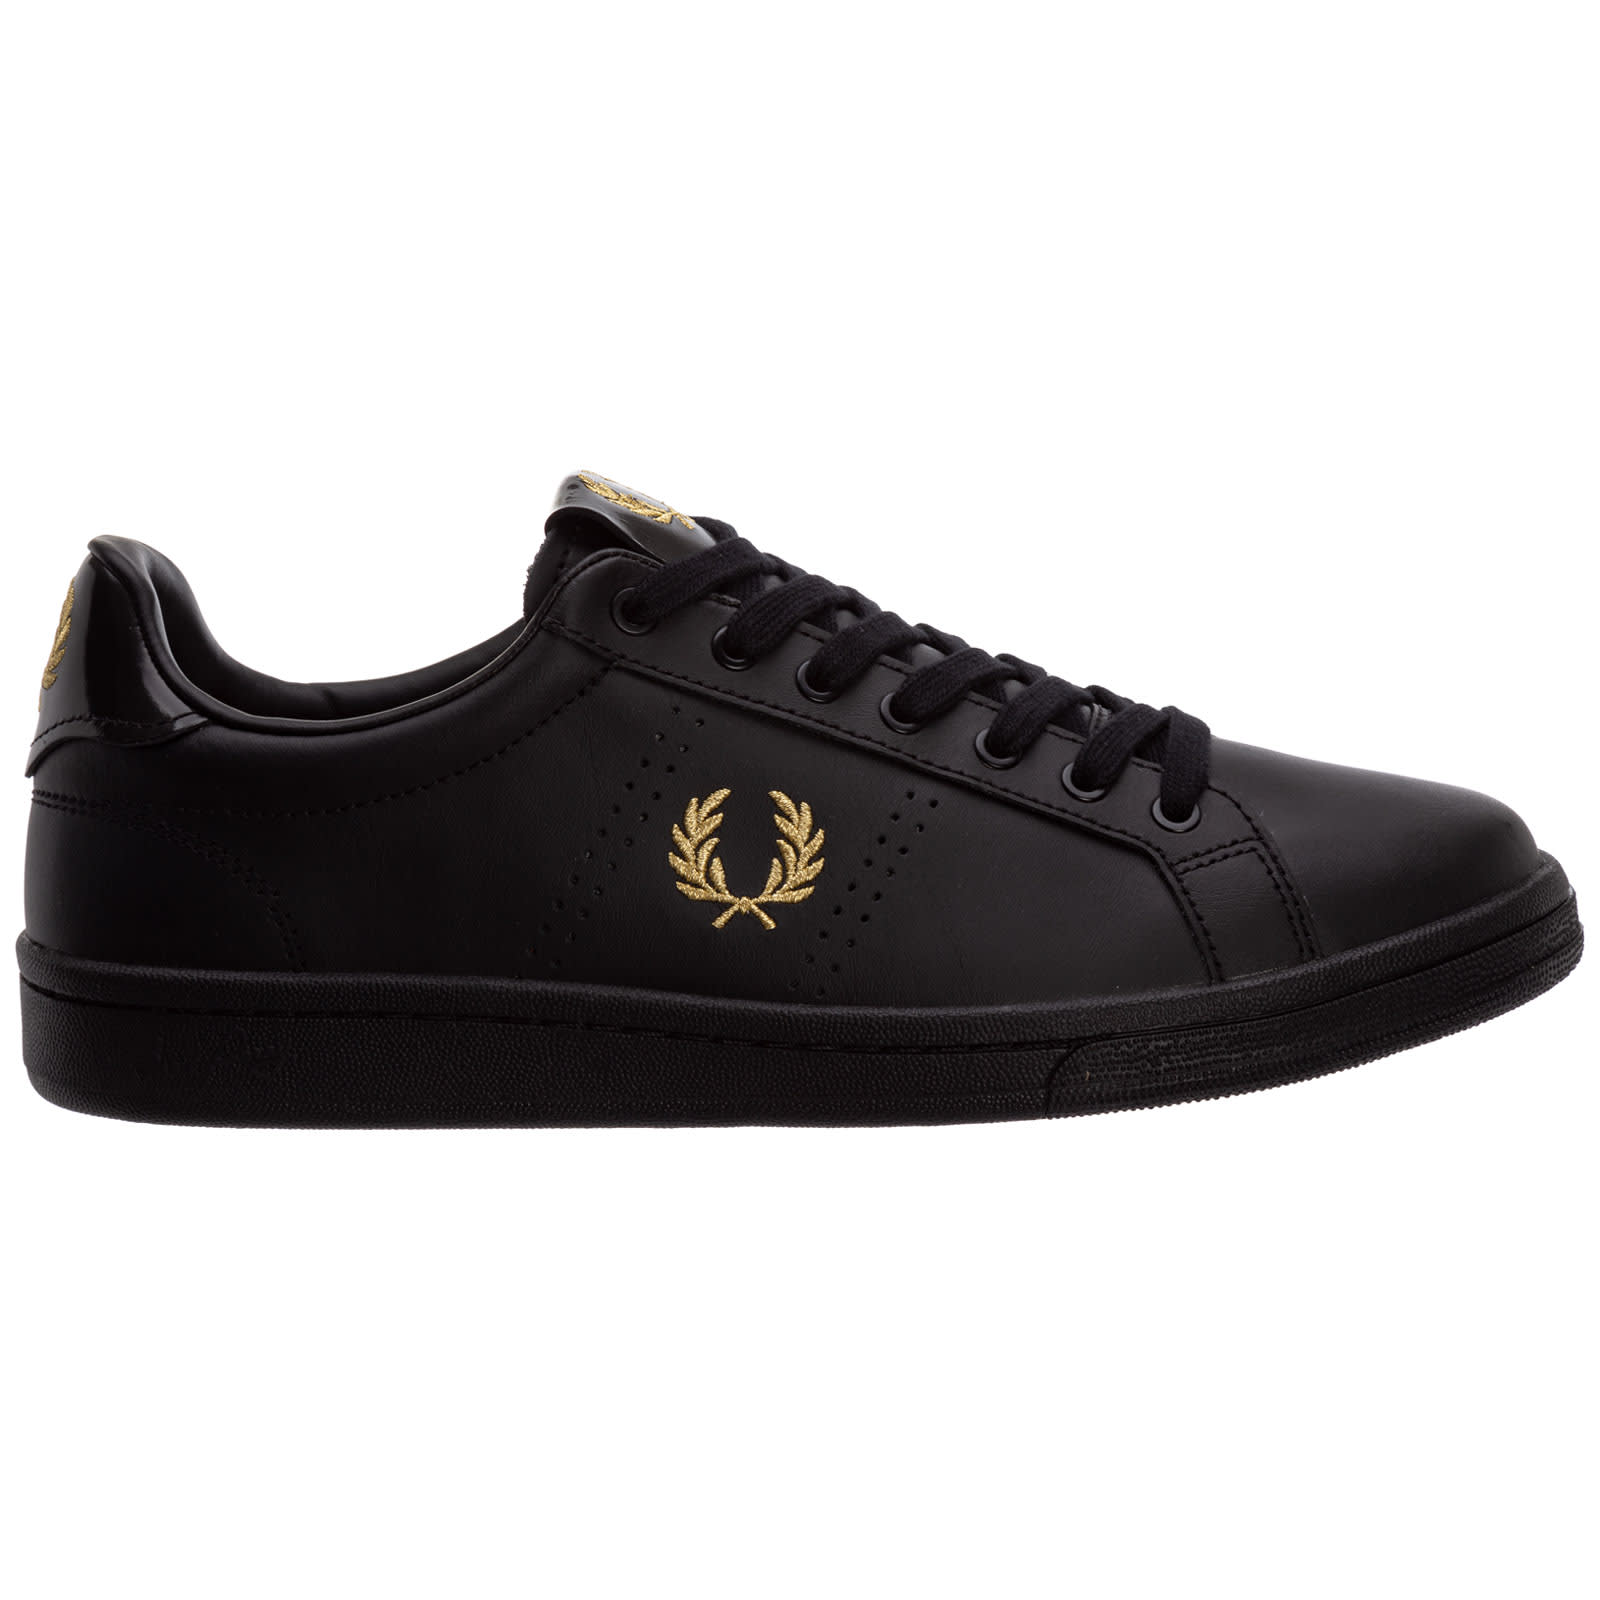 FRED PERRY DOUBLE QUESTION MARK SNEAKERS,B1251